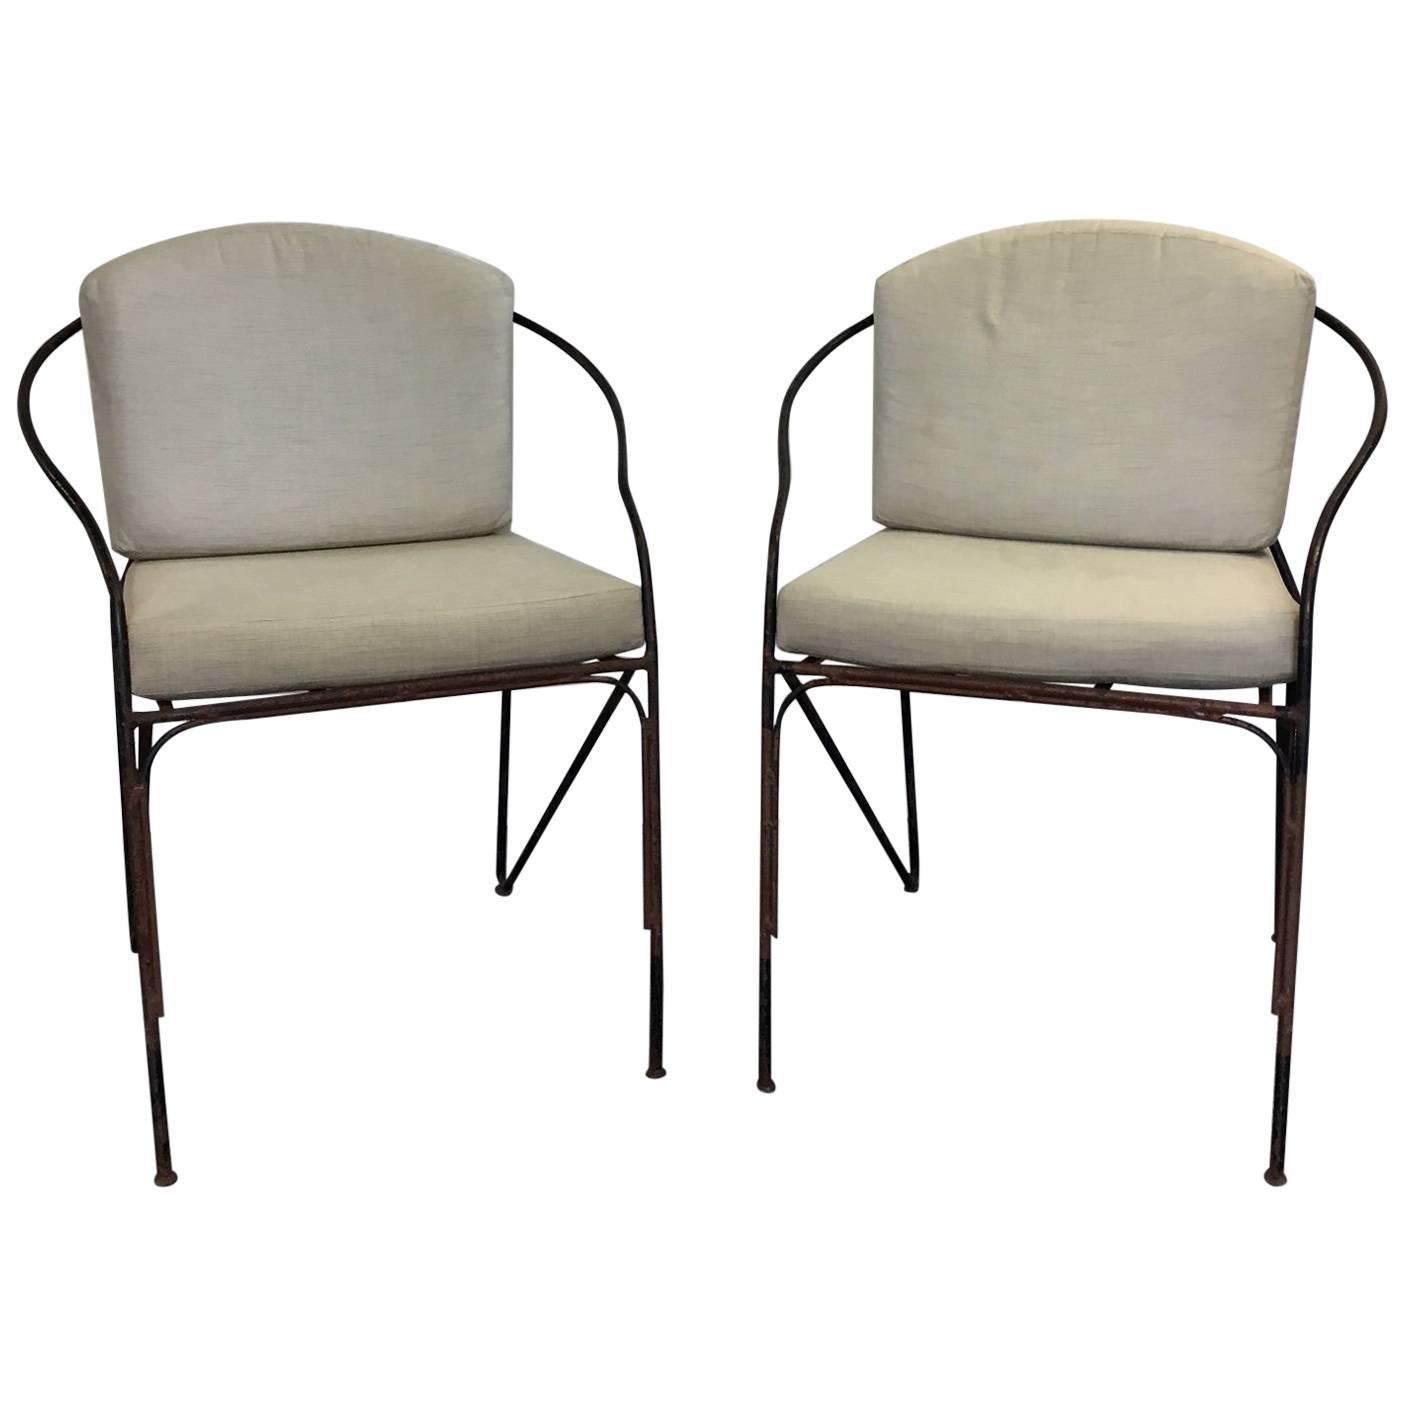 Pair of 19th c. French Iron Armchairs